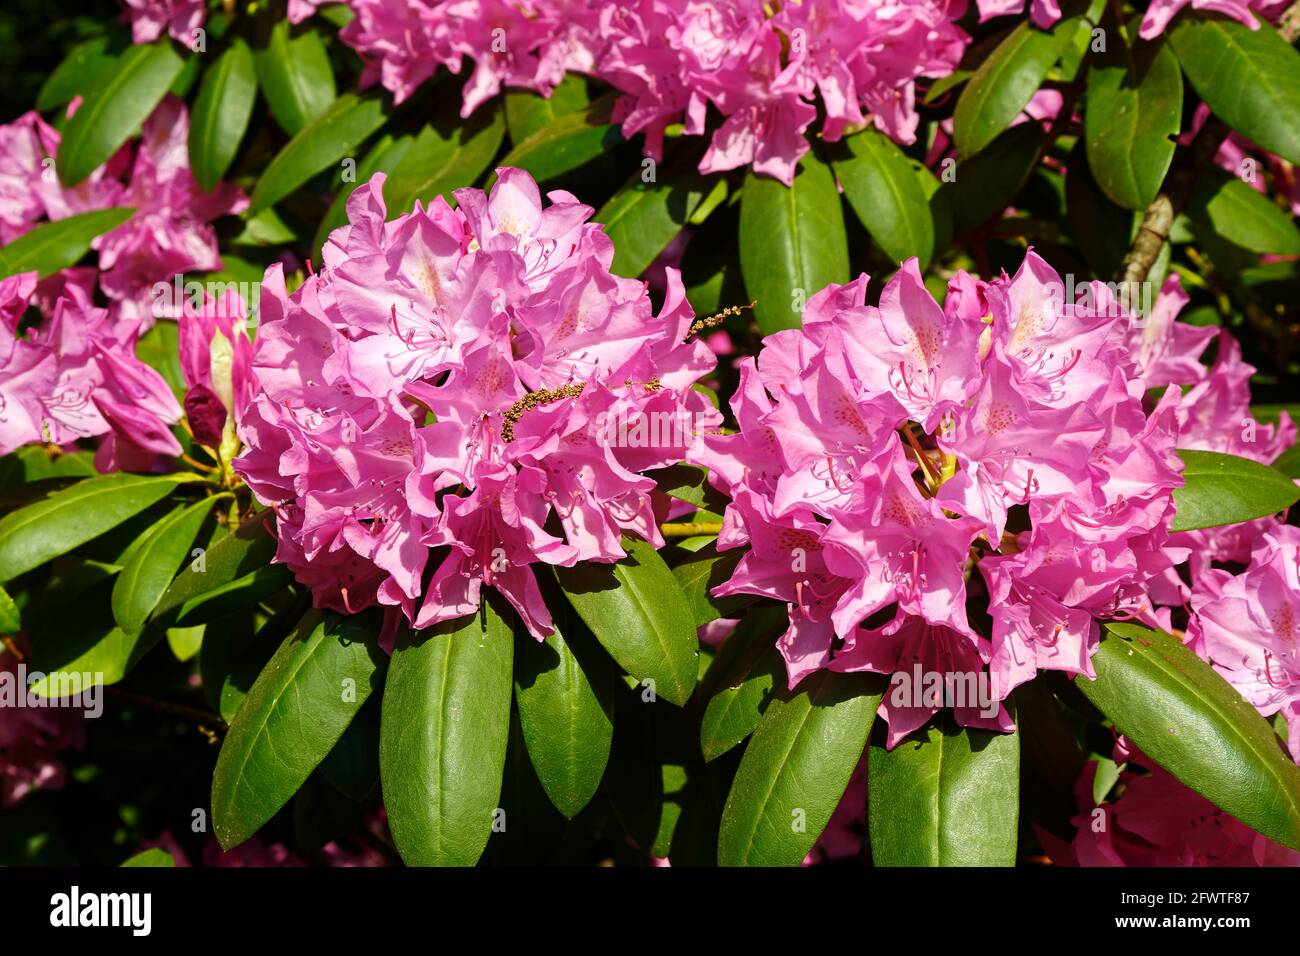 rhododendron, rose color, close-up, shrub, cultivated flowers, large clusters, green leaves, nature, Pennsylvania, spring Stock Photo